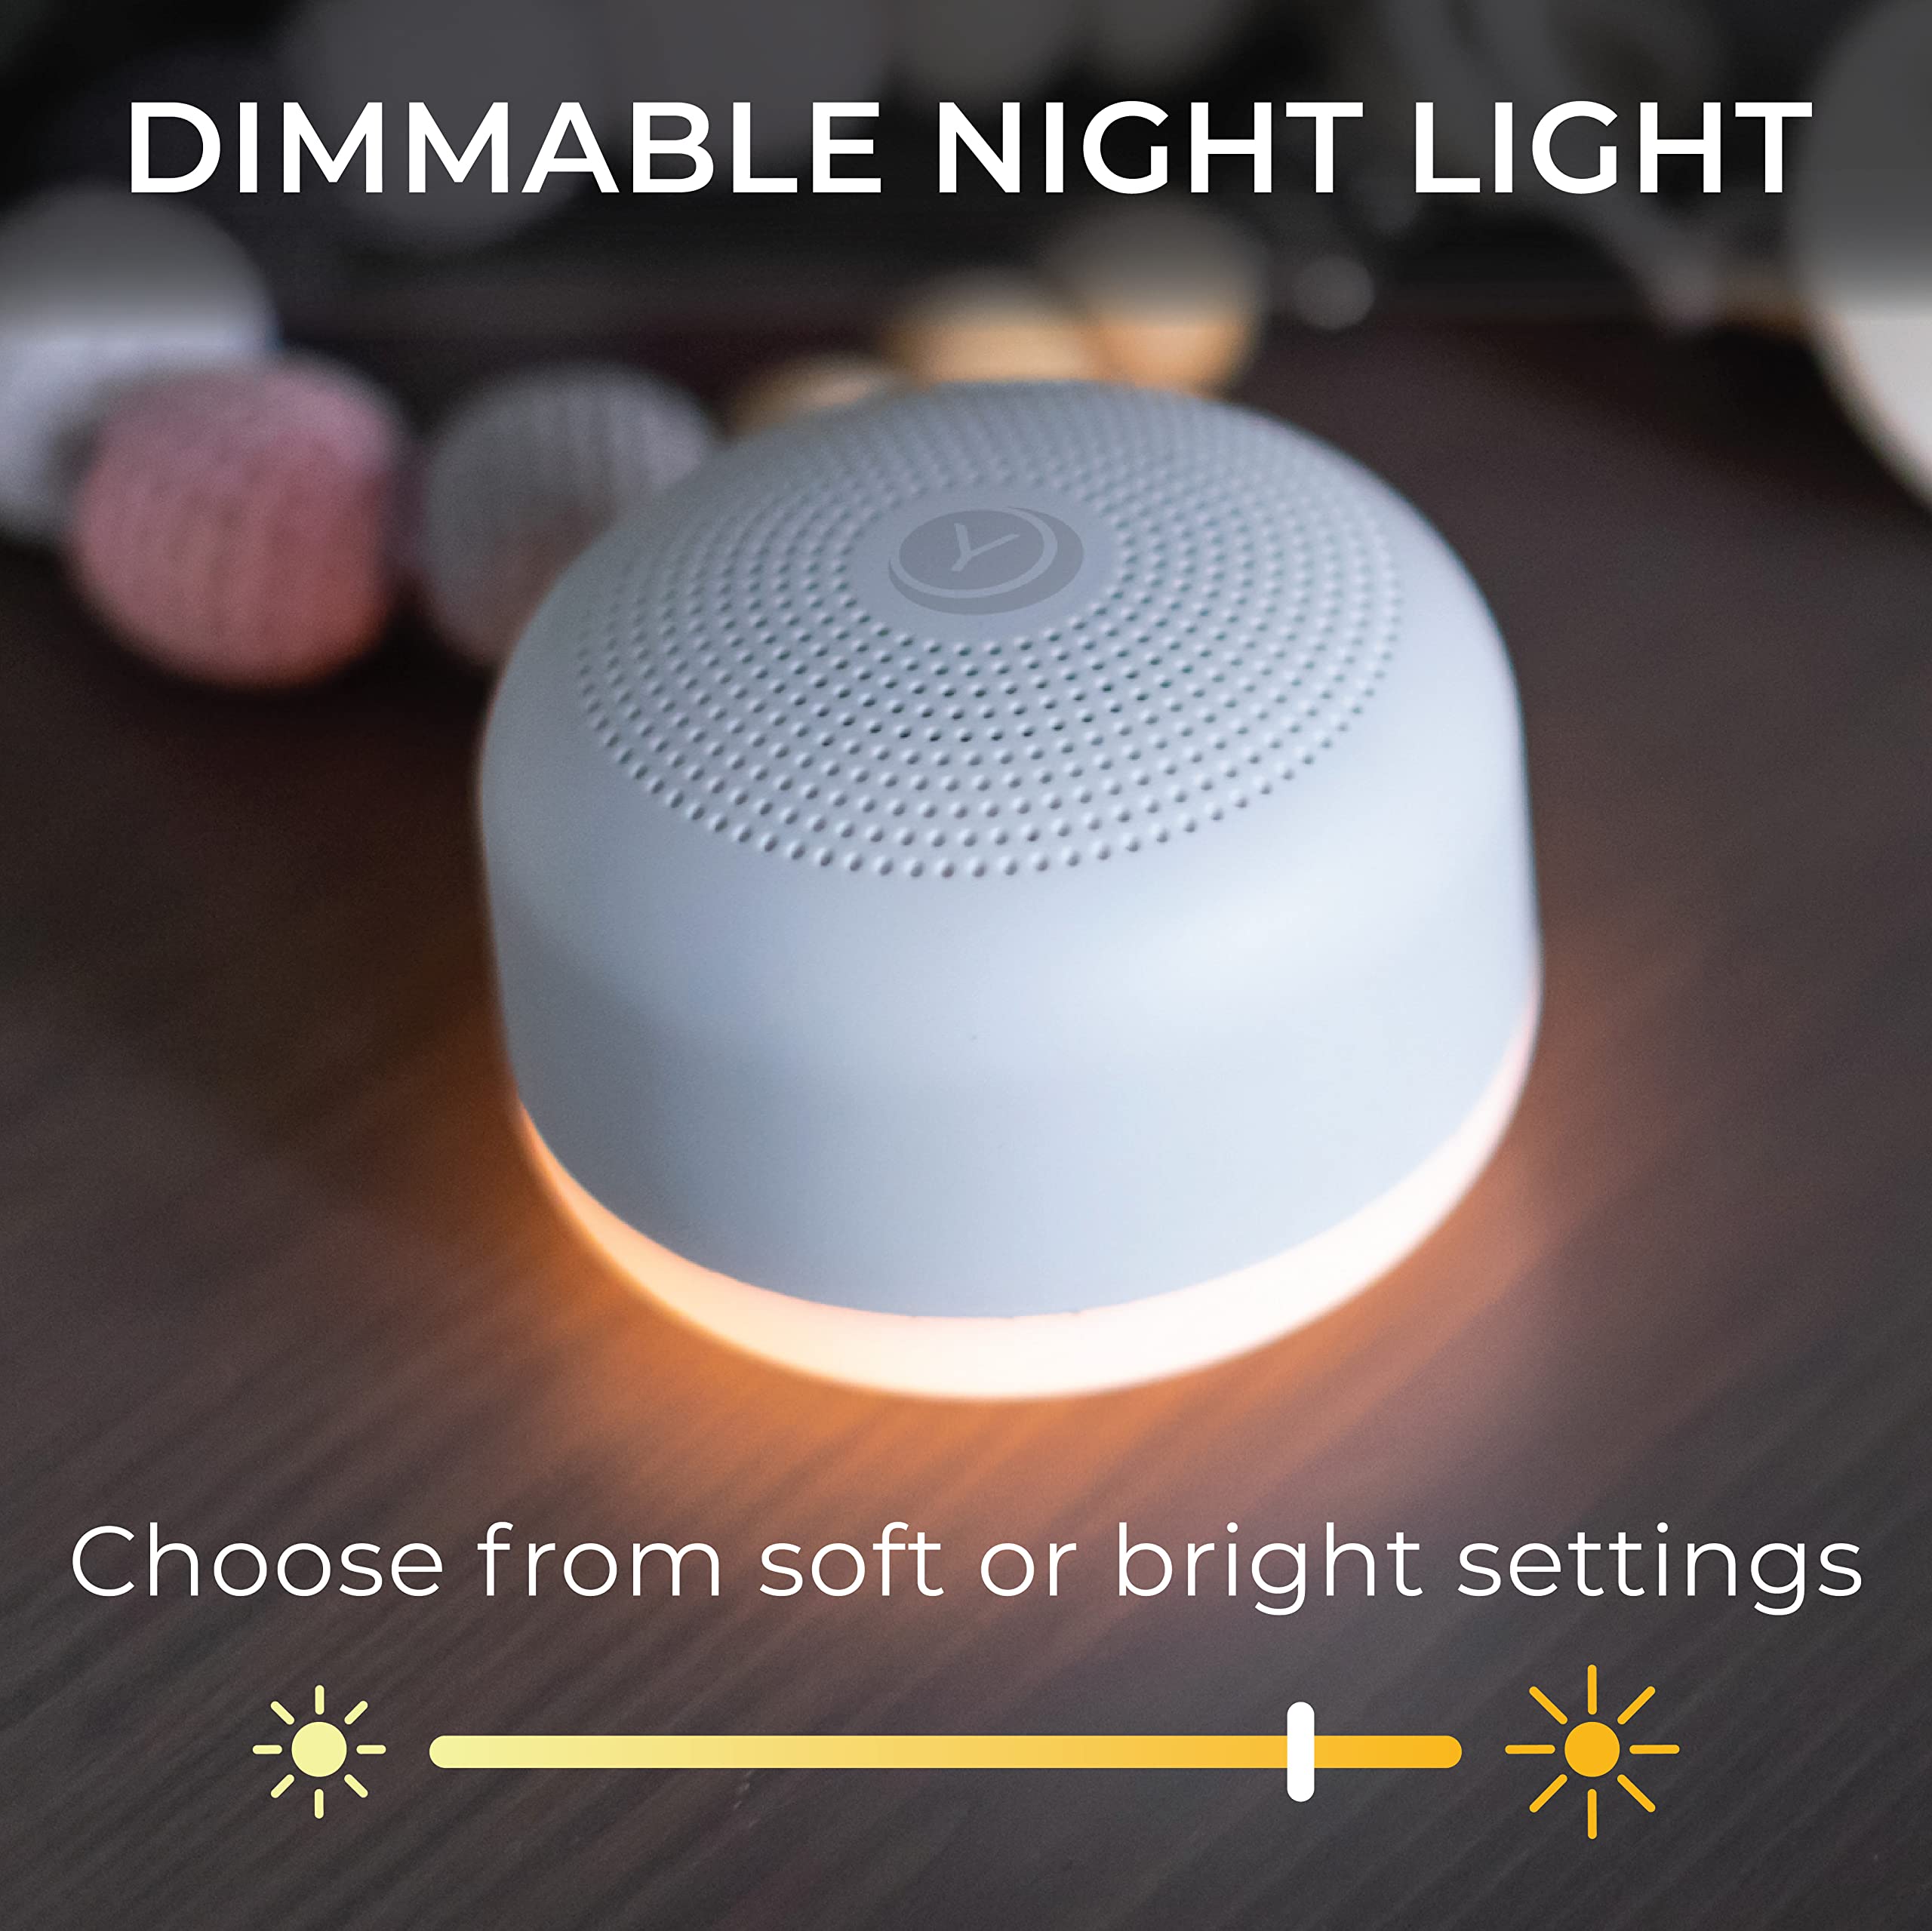 Yogasleep Travel Mini Portable White Noise Sound Machine - 6 Soothing Sounds - Soft Dimmable Night Light - Compact Sleep Therapy for Adults and Baby - USB Rechargeable - Lanyard for Easy Hanging (White)